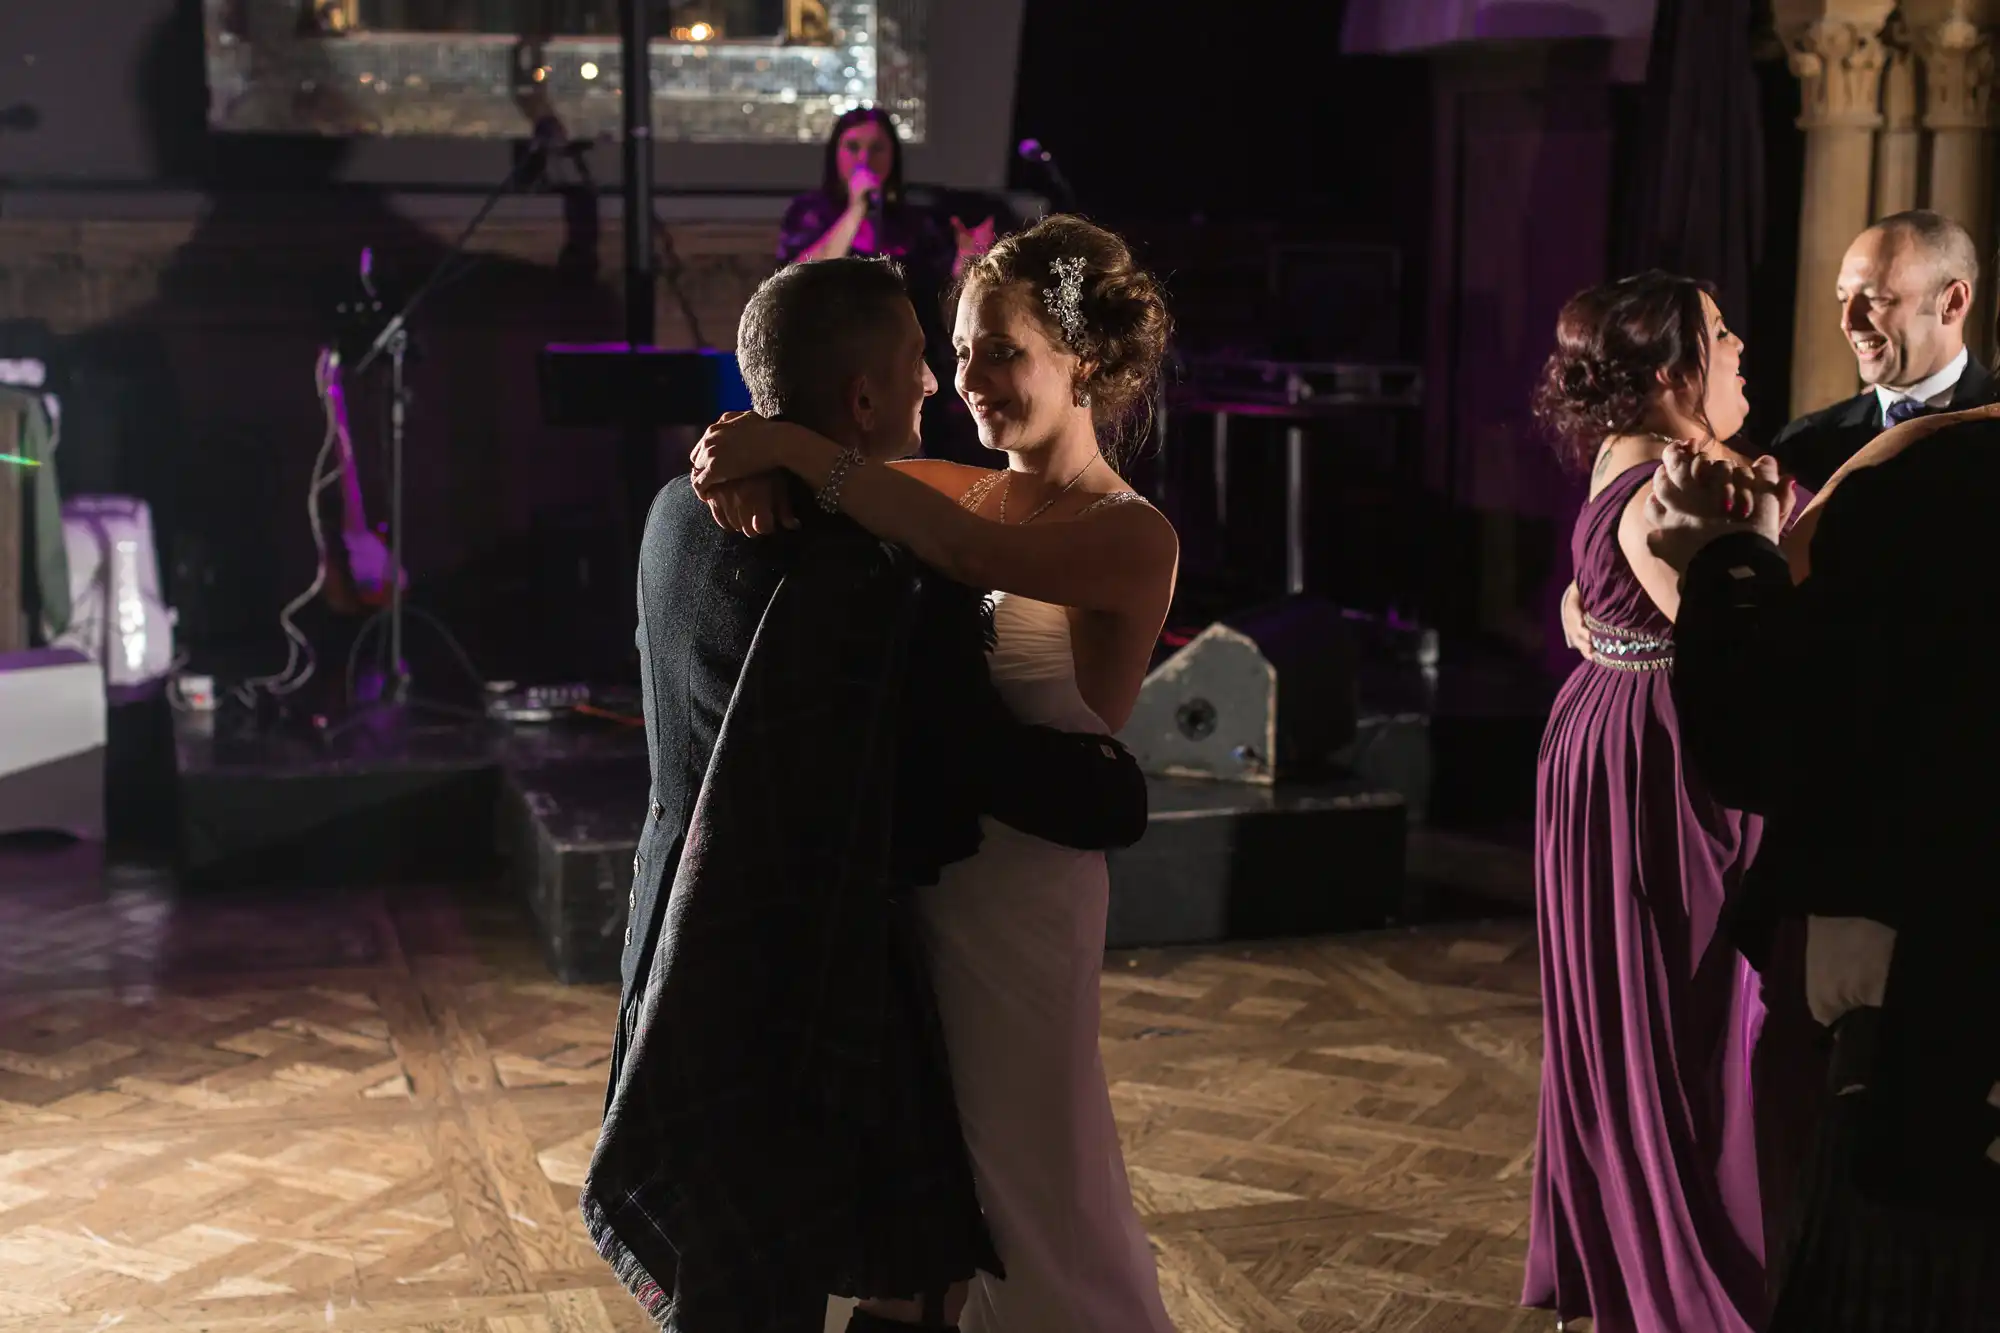 A bride and groom sharing a slow dance at their wedding reception, illuminated by soft lighting, with another dancing couple and a musician in the background.